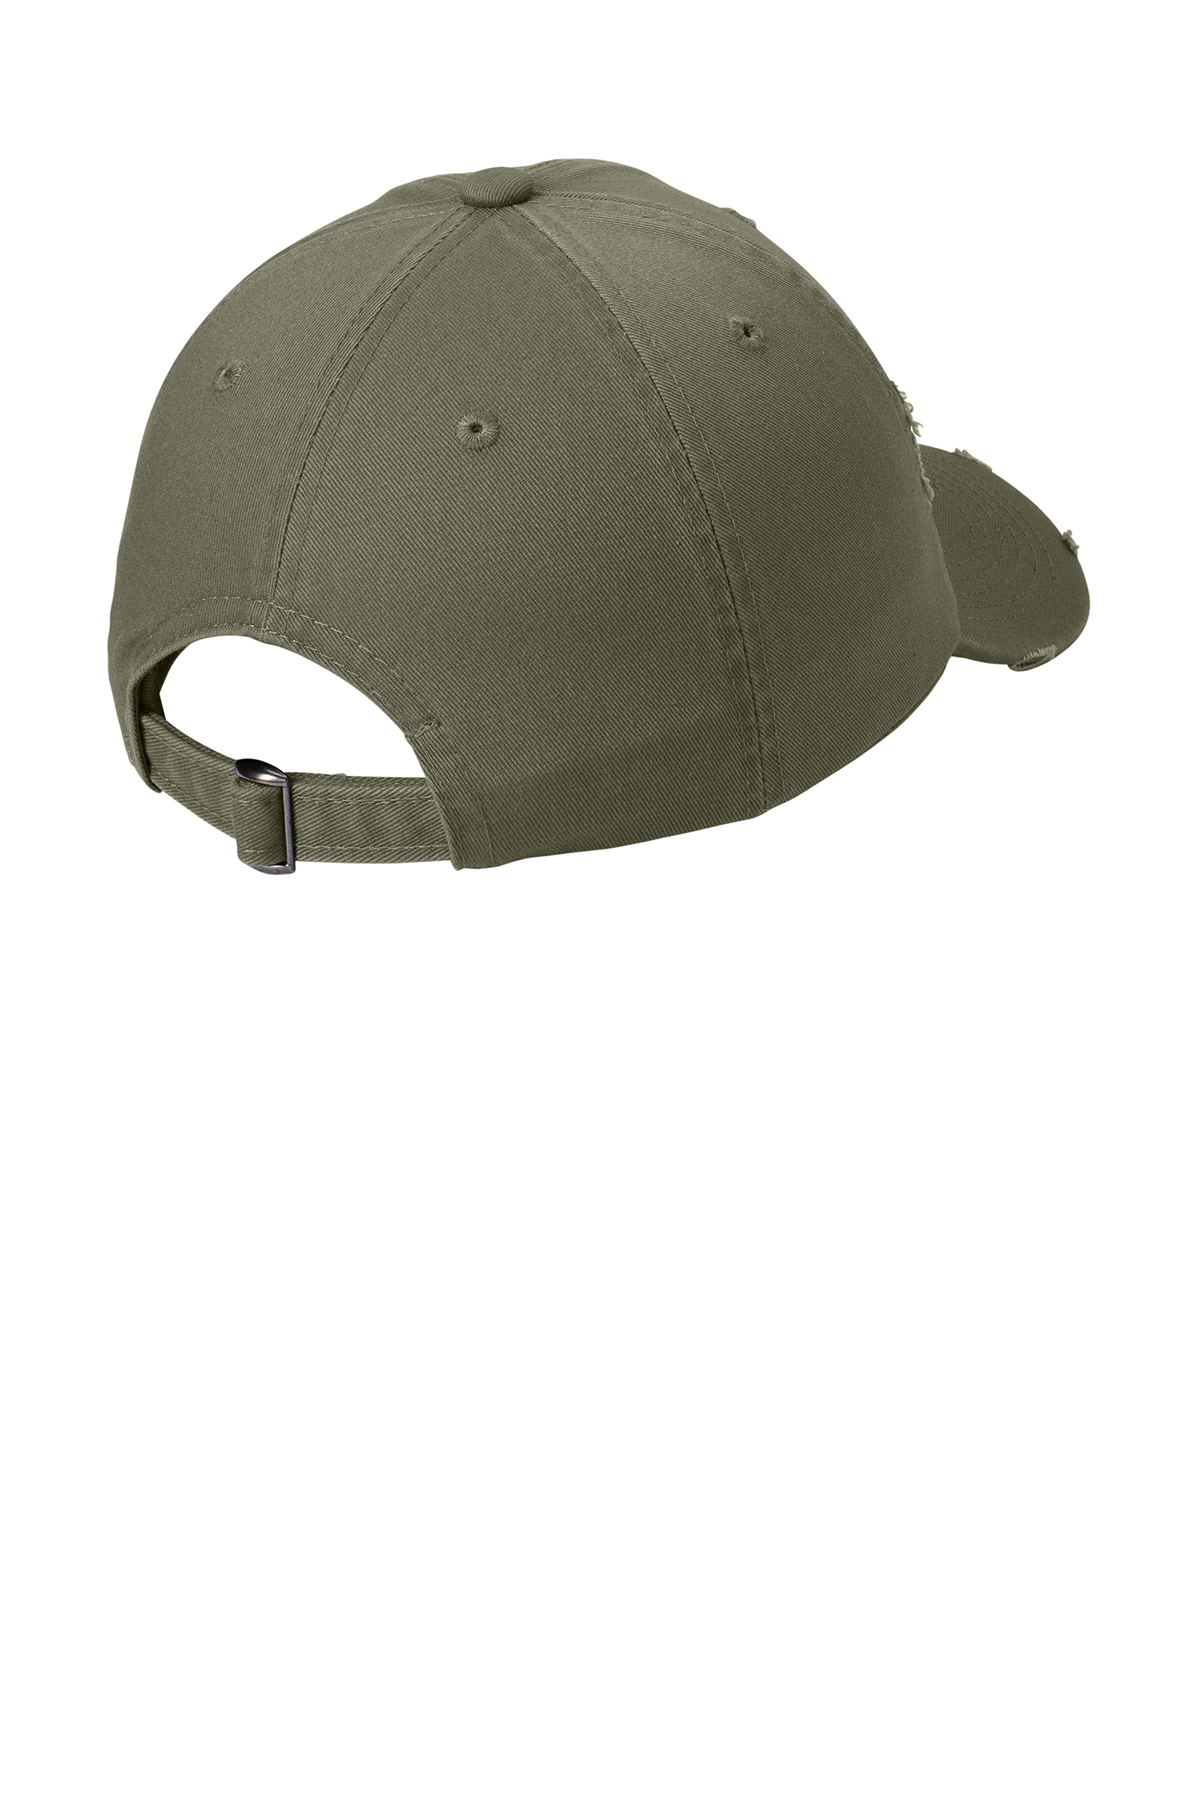 District Distressed Military Hat-One Size (Military Camo), adult Unisex, Green